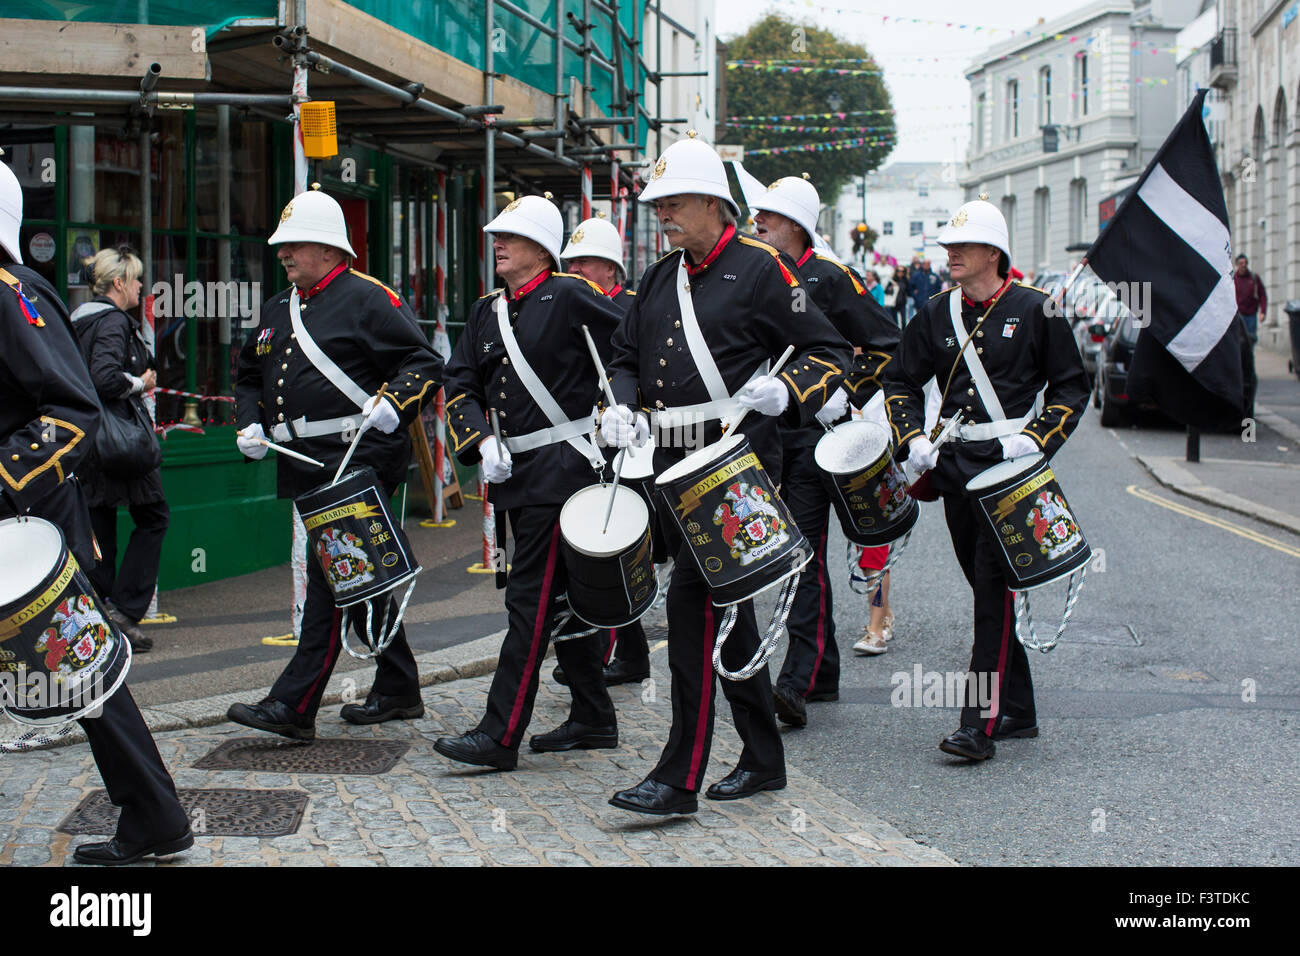 Falmouth Marine Band marching through Falmouth's High Street on October 11th, 2015. Stock Photo